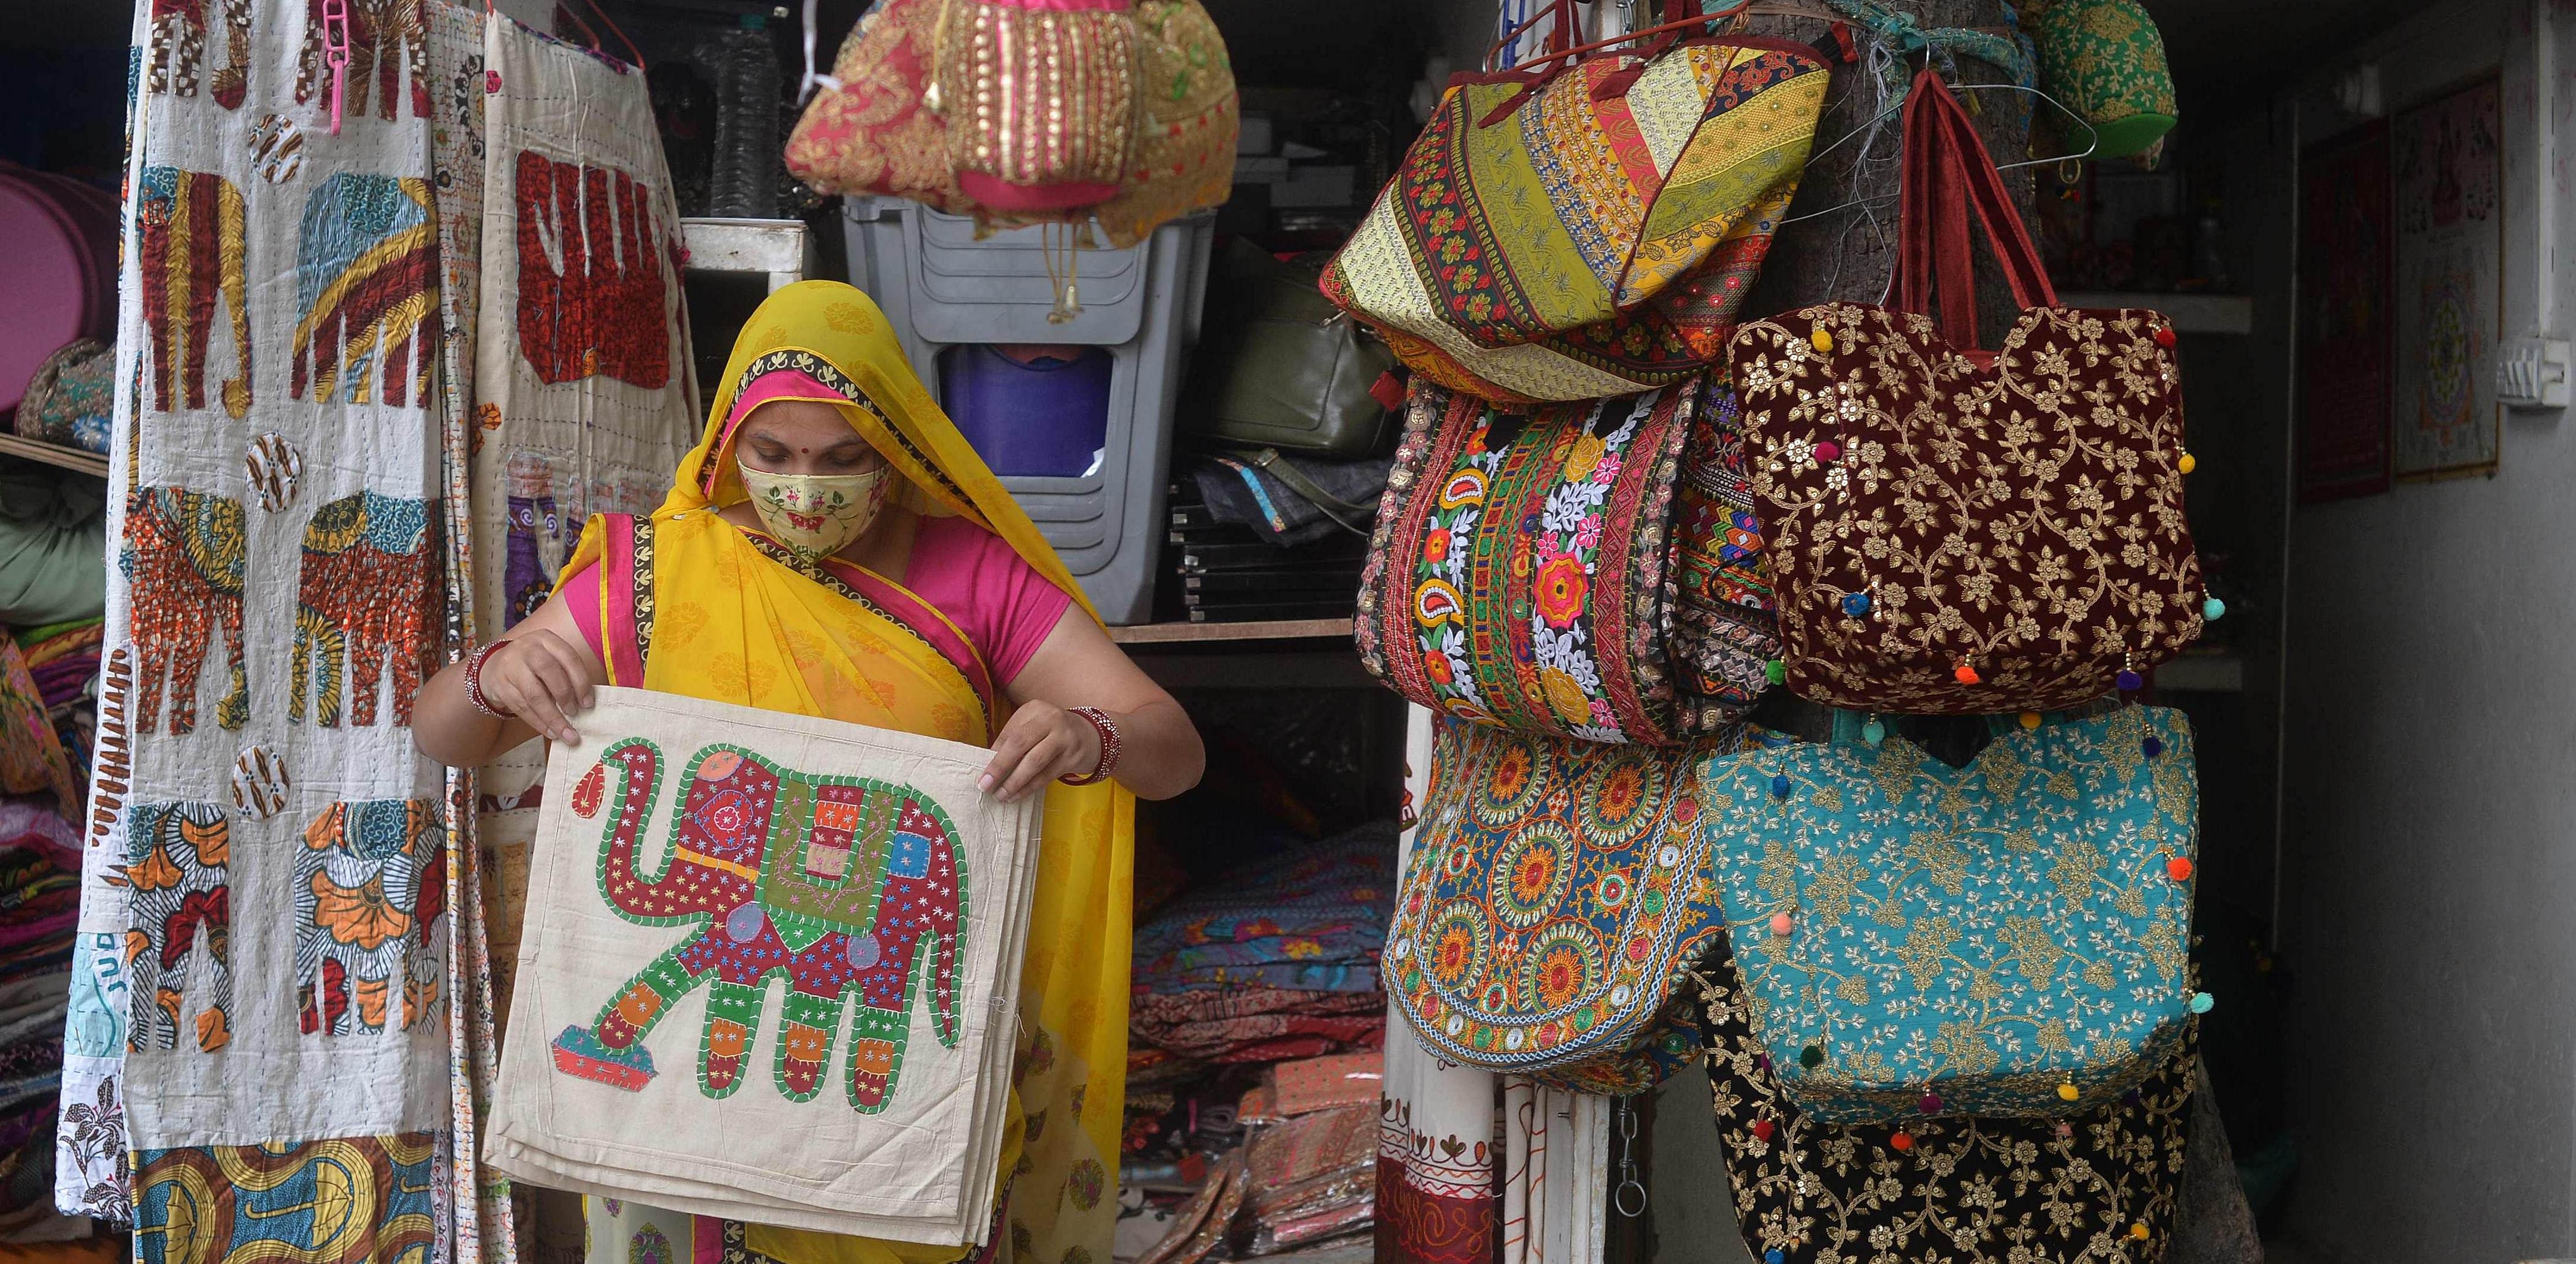 A woman vendor wearing a facemask as a preventive measure against the Covid-19 coronavirus, arranges cushion covers at her roadside shop in New Delhi. Credit: AFP